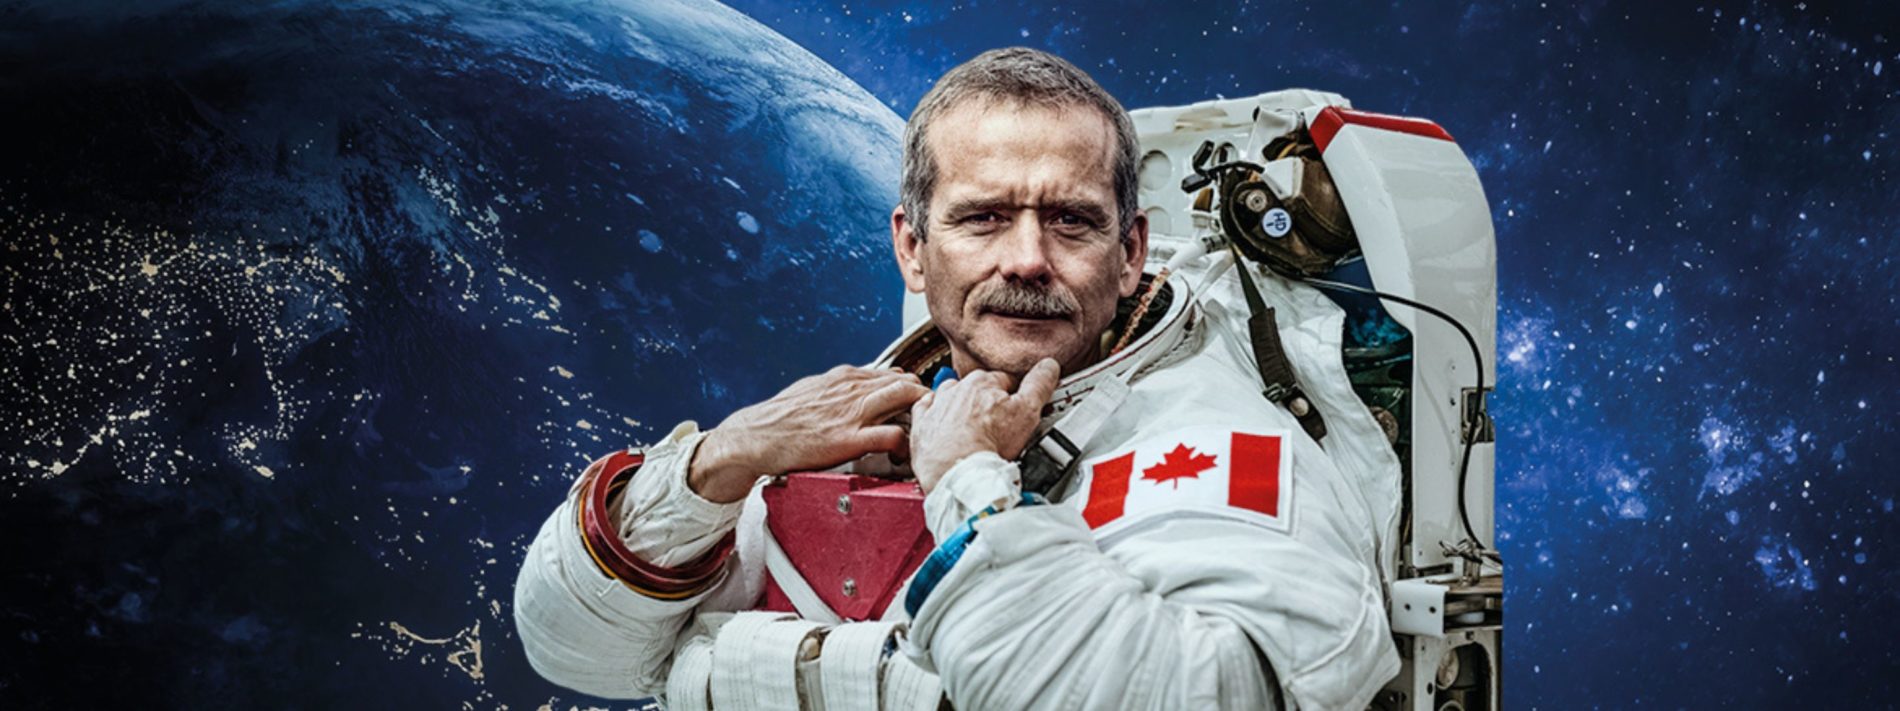 On Earth and Space – Chris Hadfield’s Guide To the Cosmos